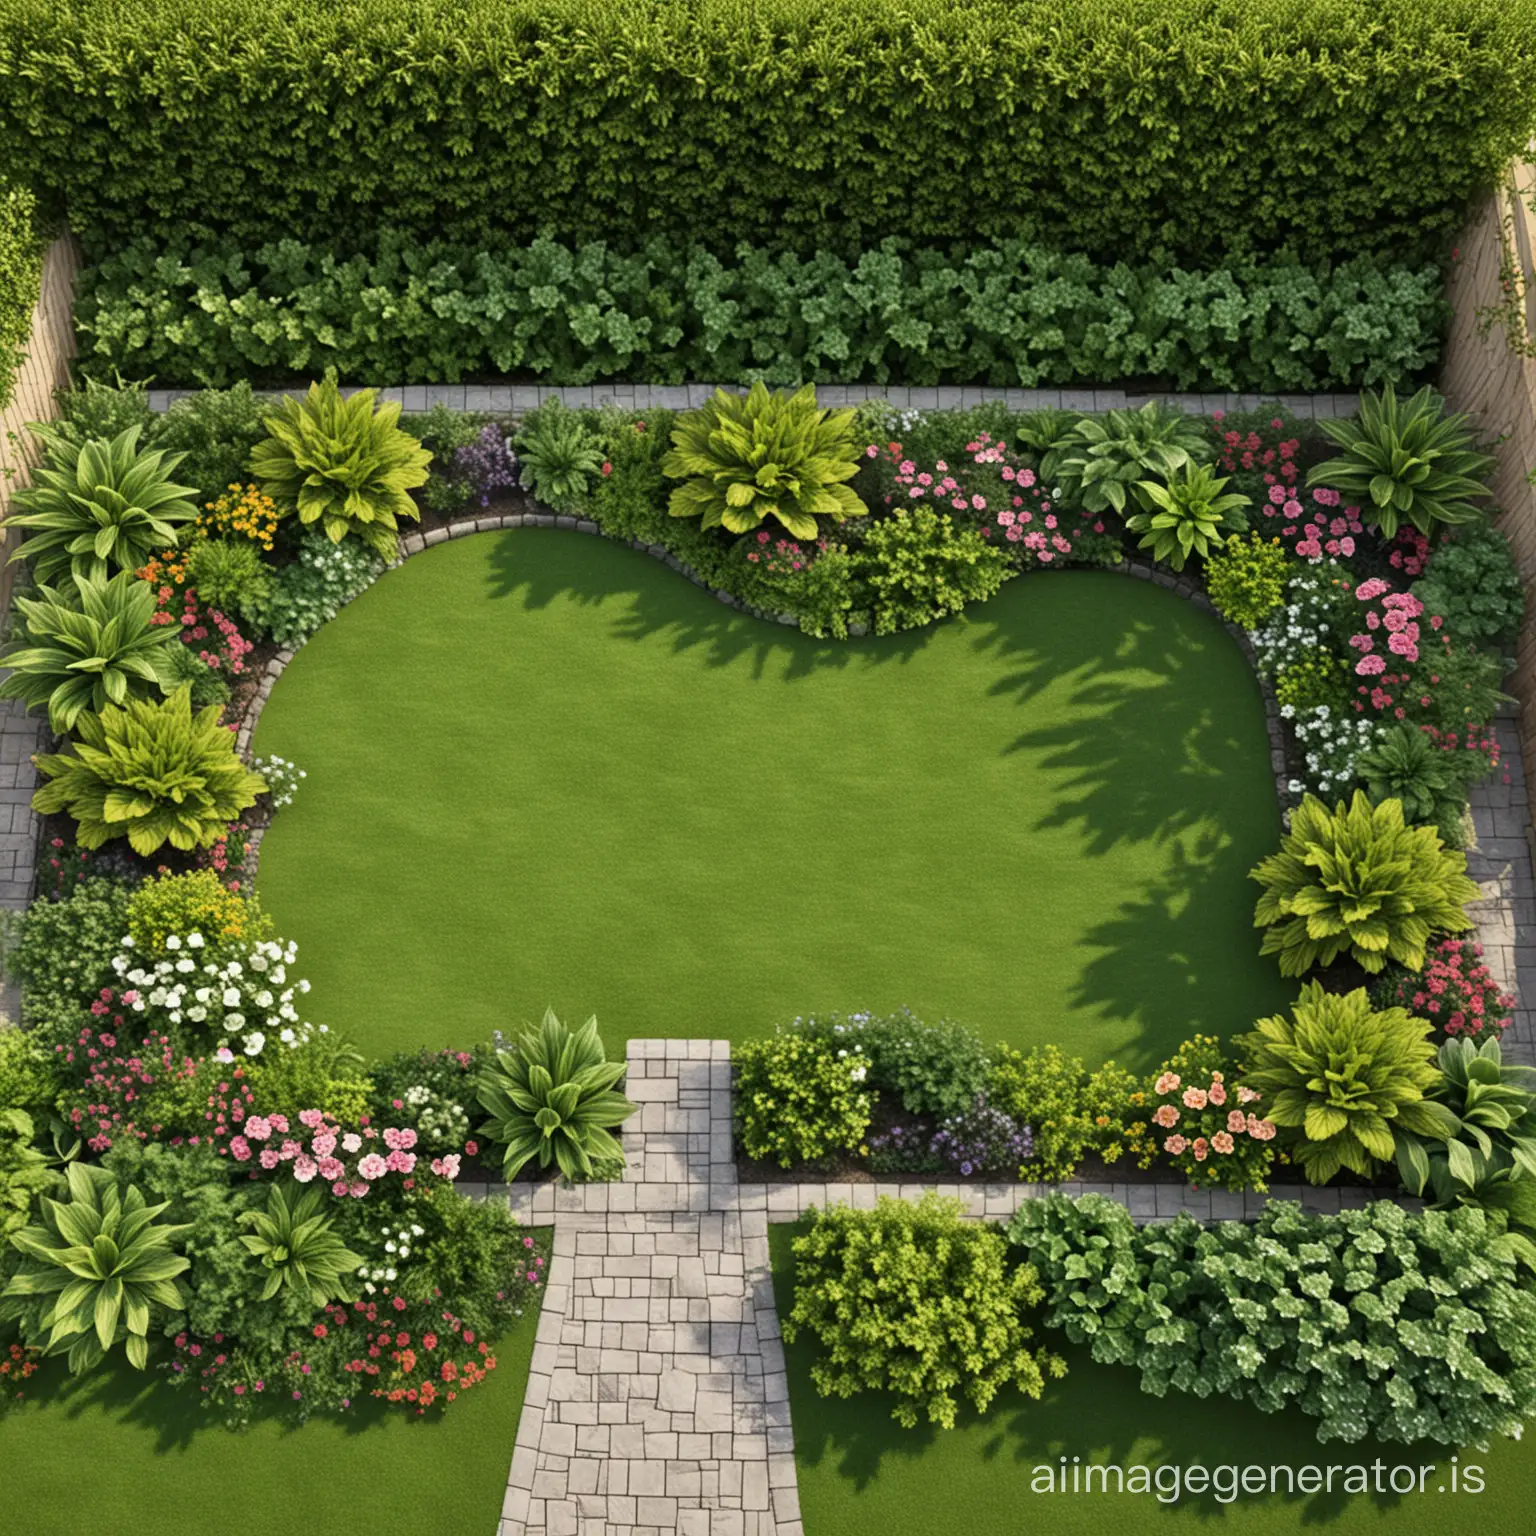 Realistic-Garden-Design-with-Vibrant-Flora-and-Tranquil-Setting